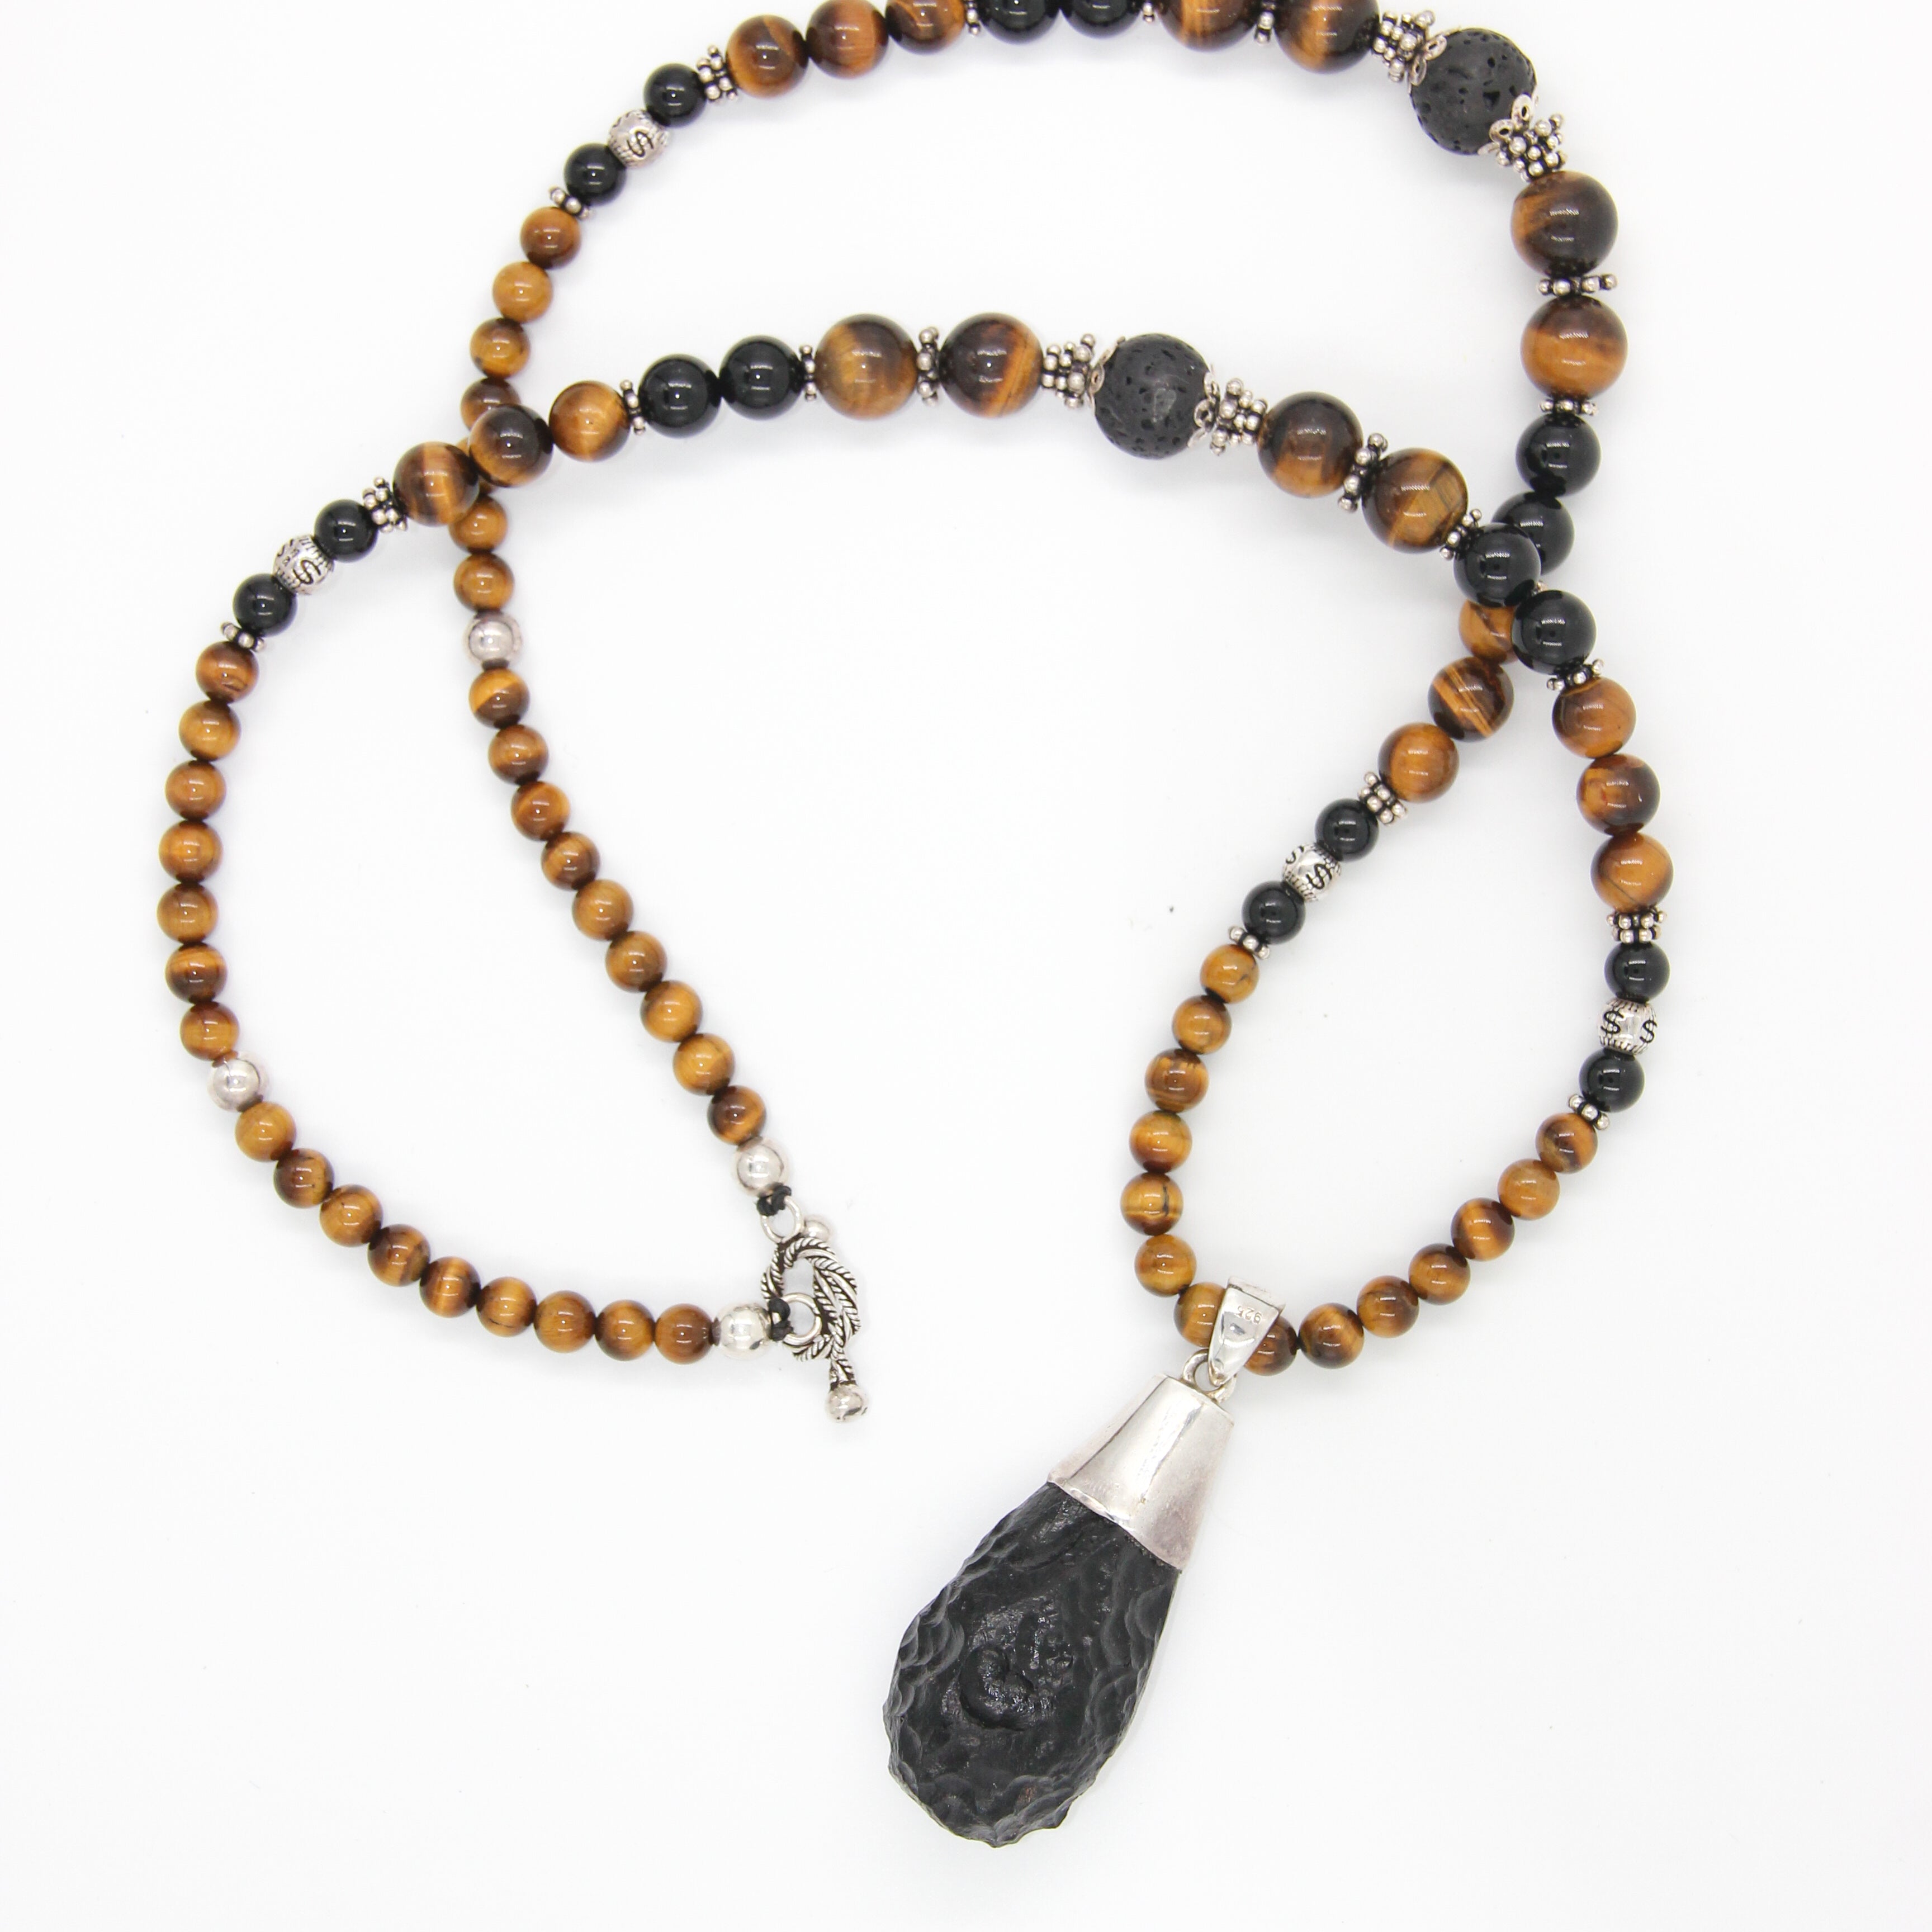 Tiger's Eye Necklace with Tektite (Meteorite), Black Onyx, Lava and Silver Beads